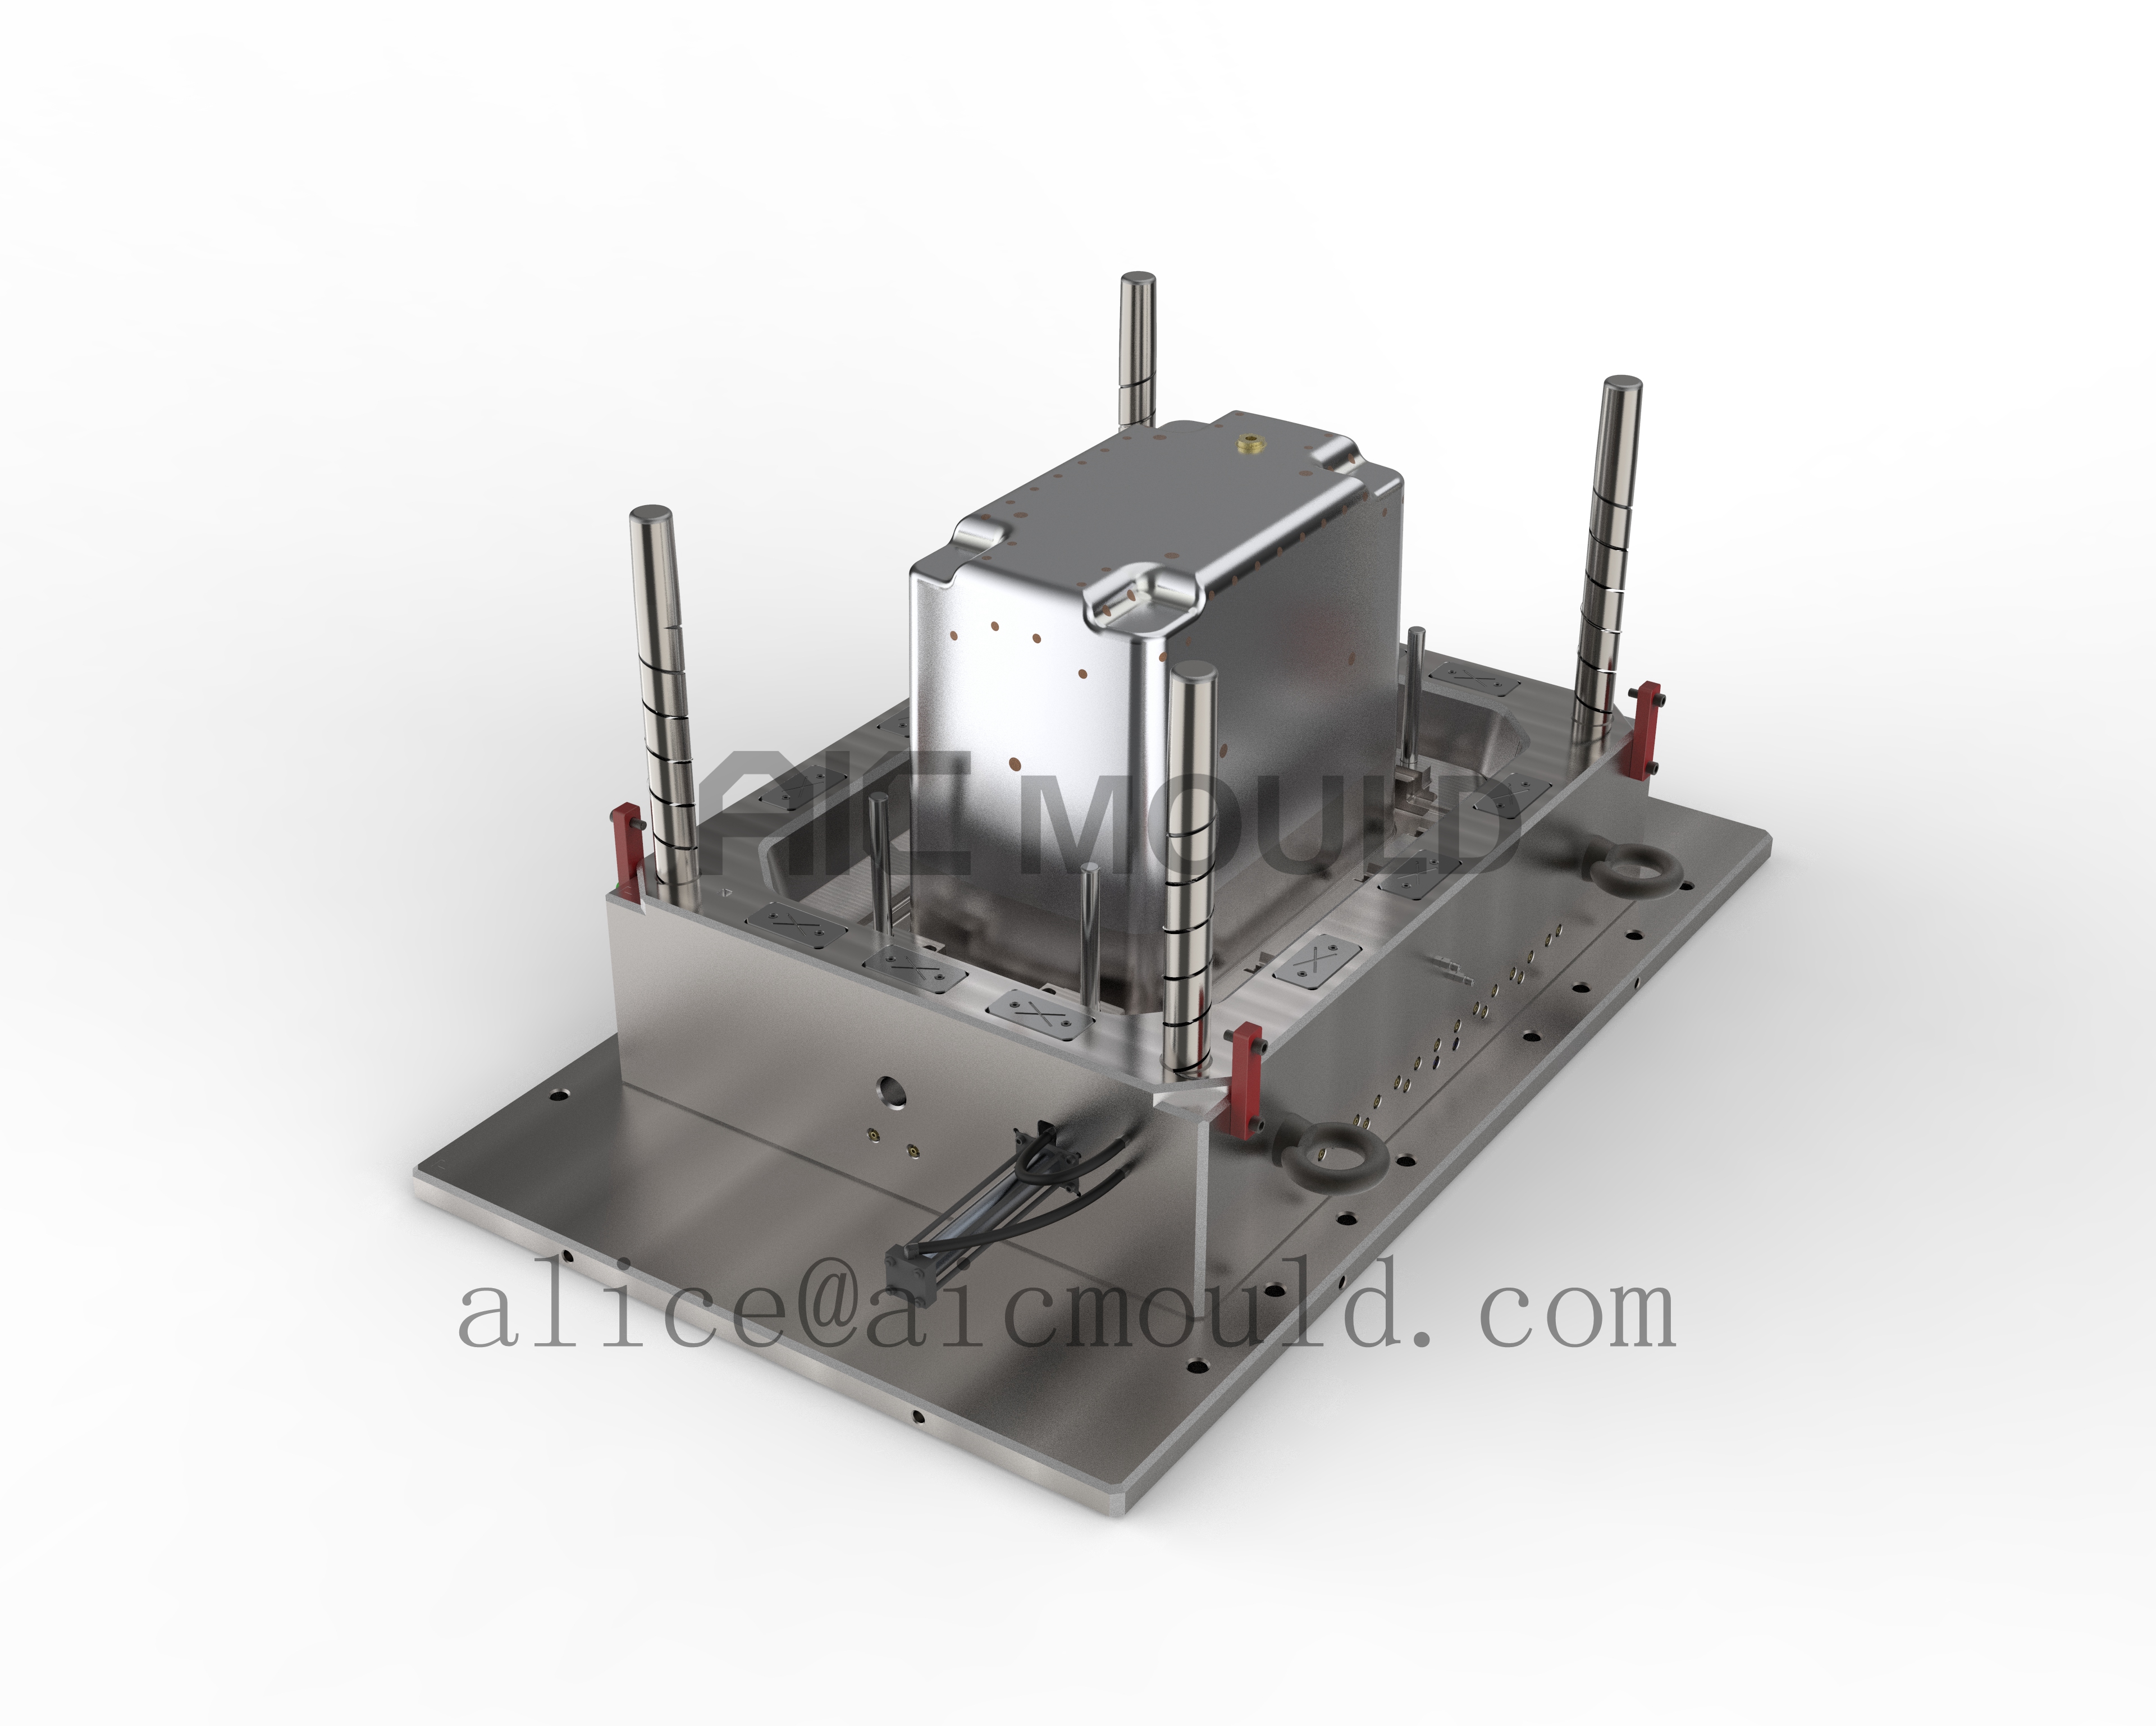 660L  plastic Dustbin molds supplier from China